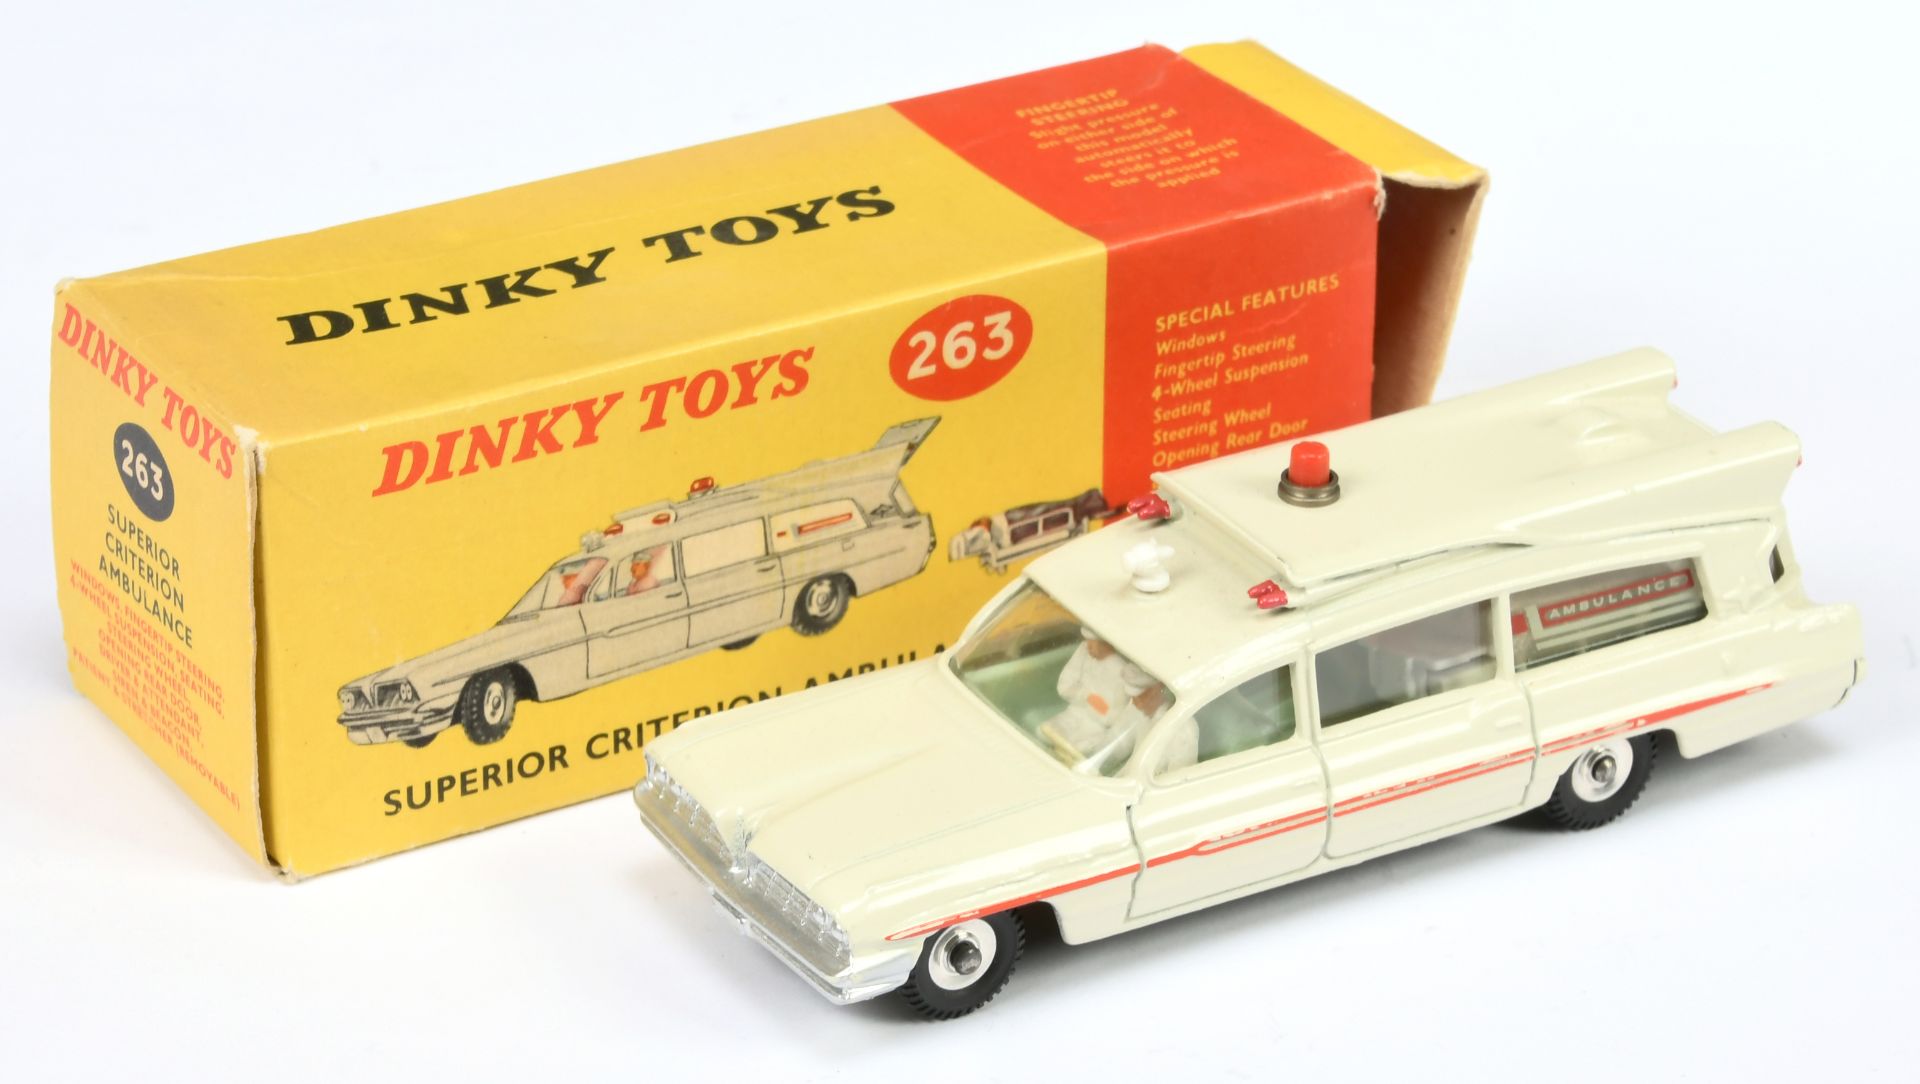 Dinky Toys 263 Superior Criterion "Ambulance" - Off white body, red trim and solid roof light, pa...